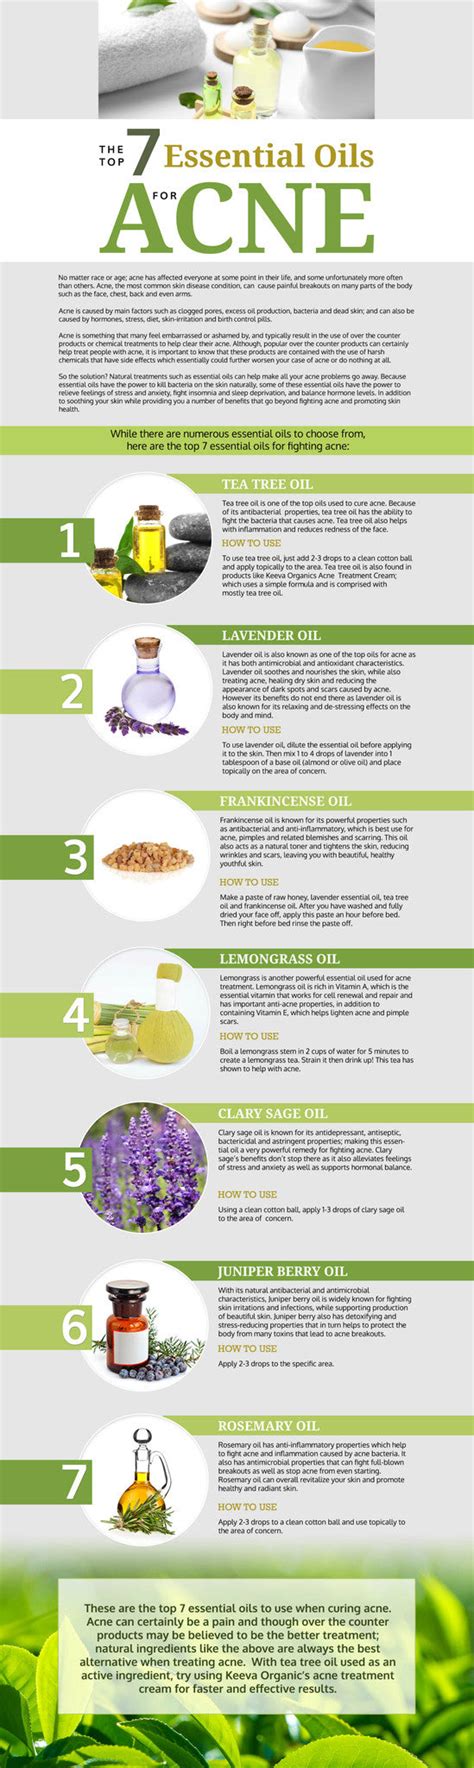 The Top 7 Essential Oils For Acne